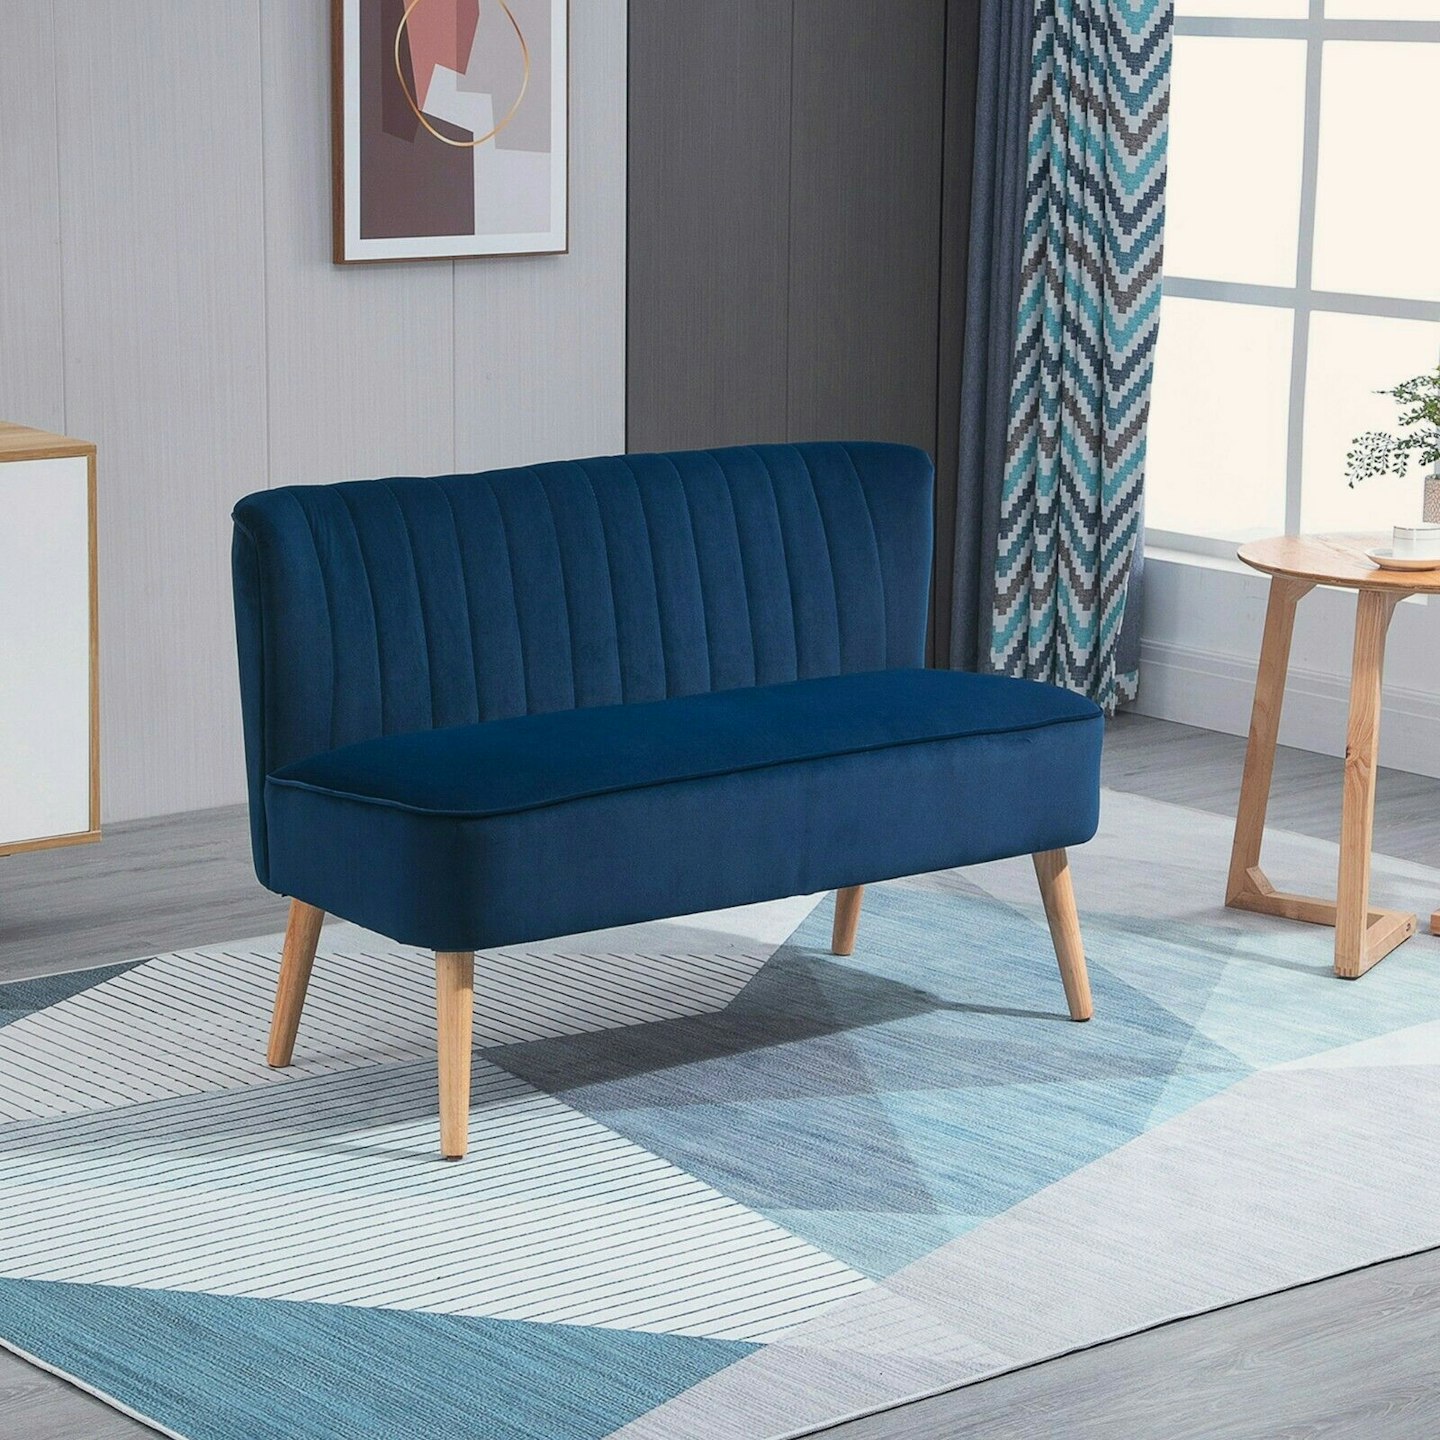 Blue Two Seater Sofa, £139.99